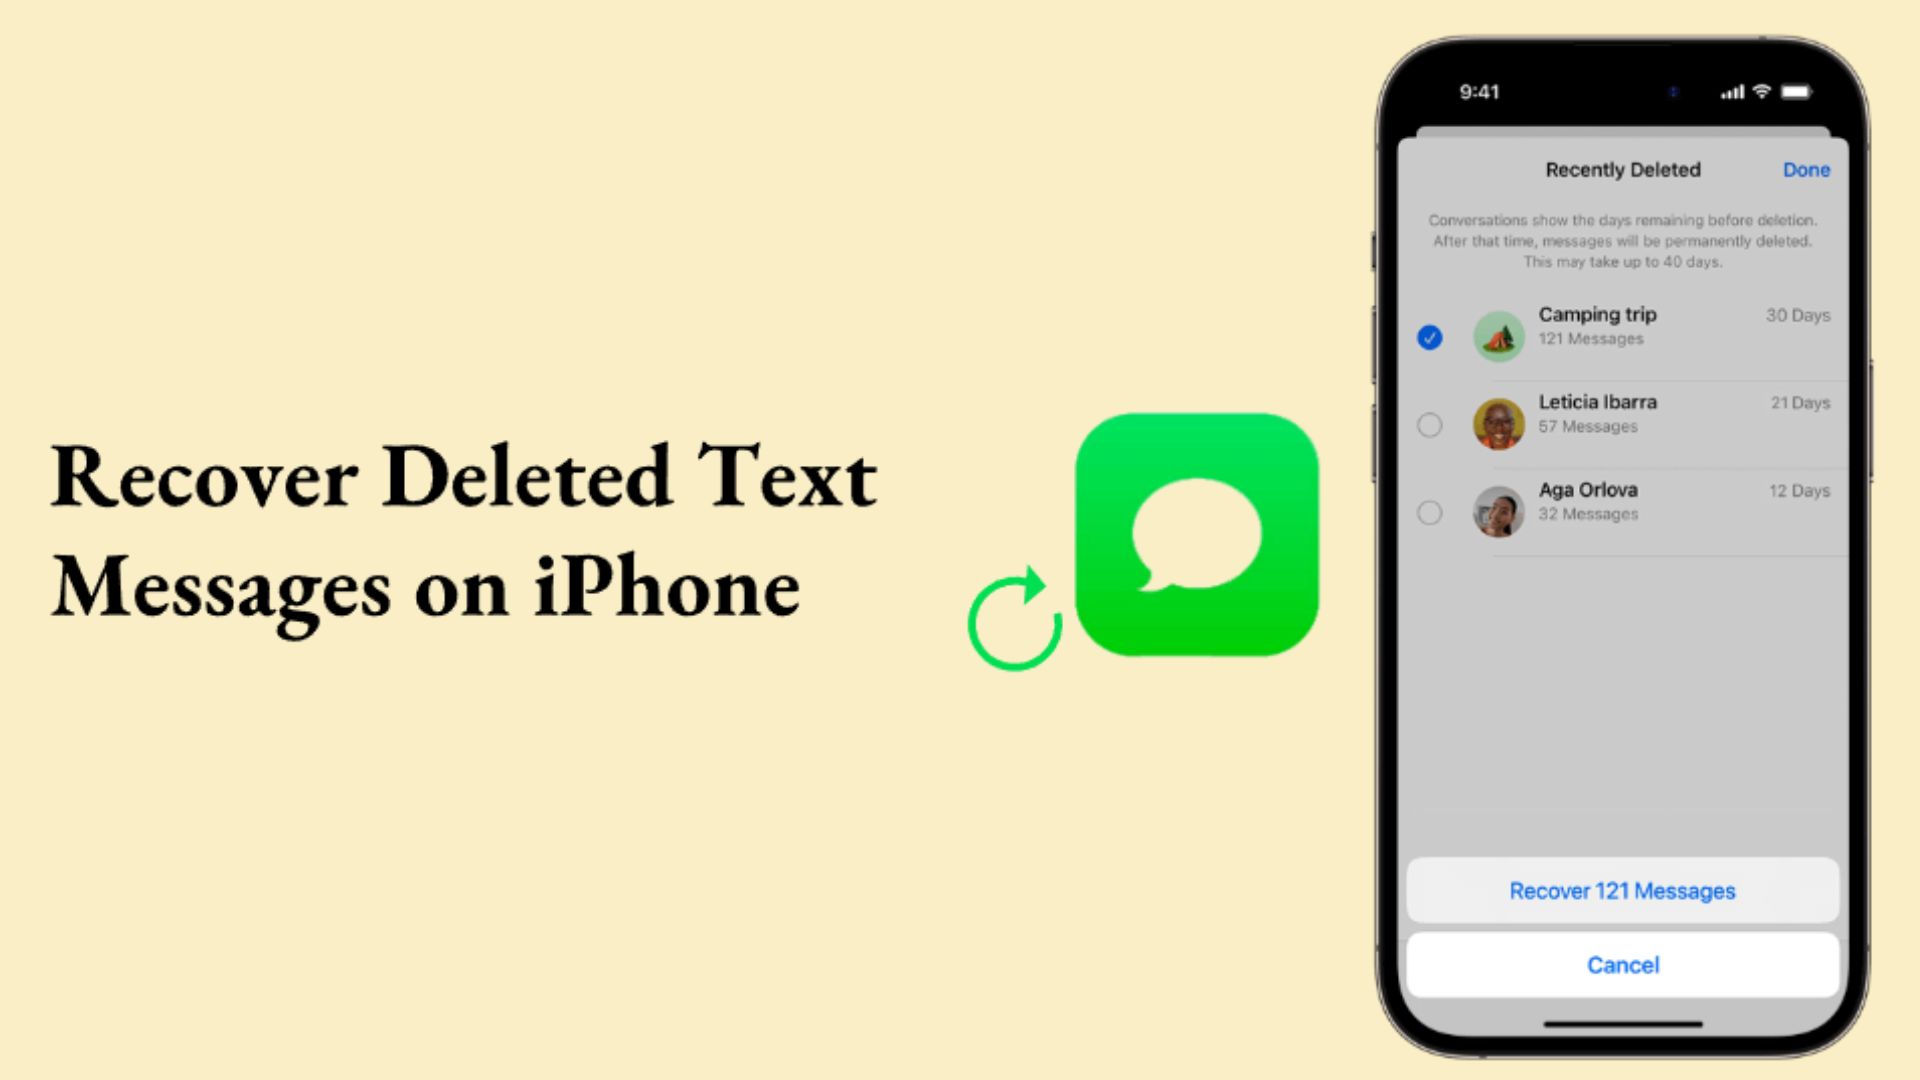 How To Restore Deleted iPhone Text Messages In A Few Simple Steps